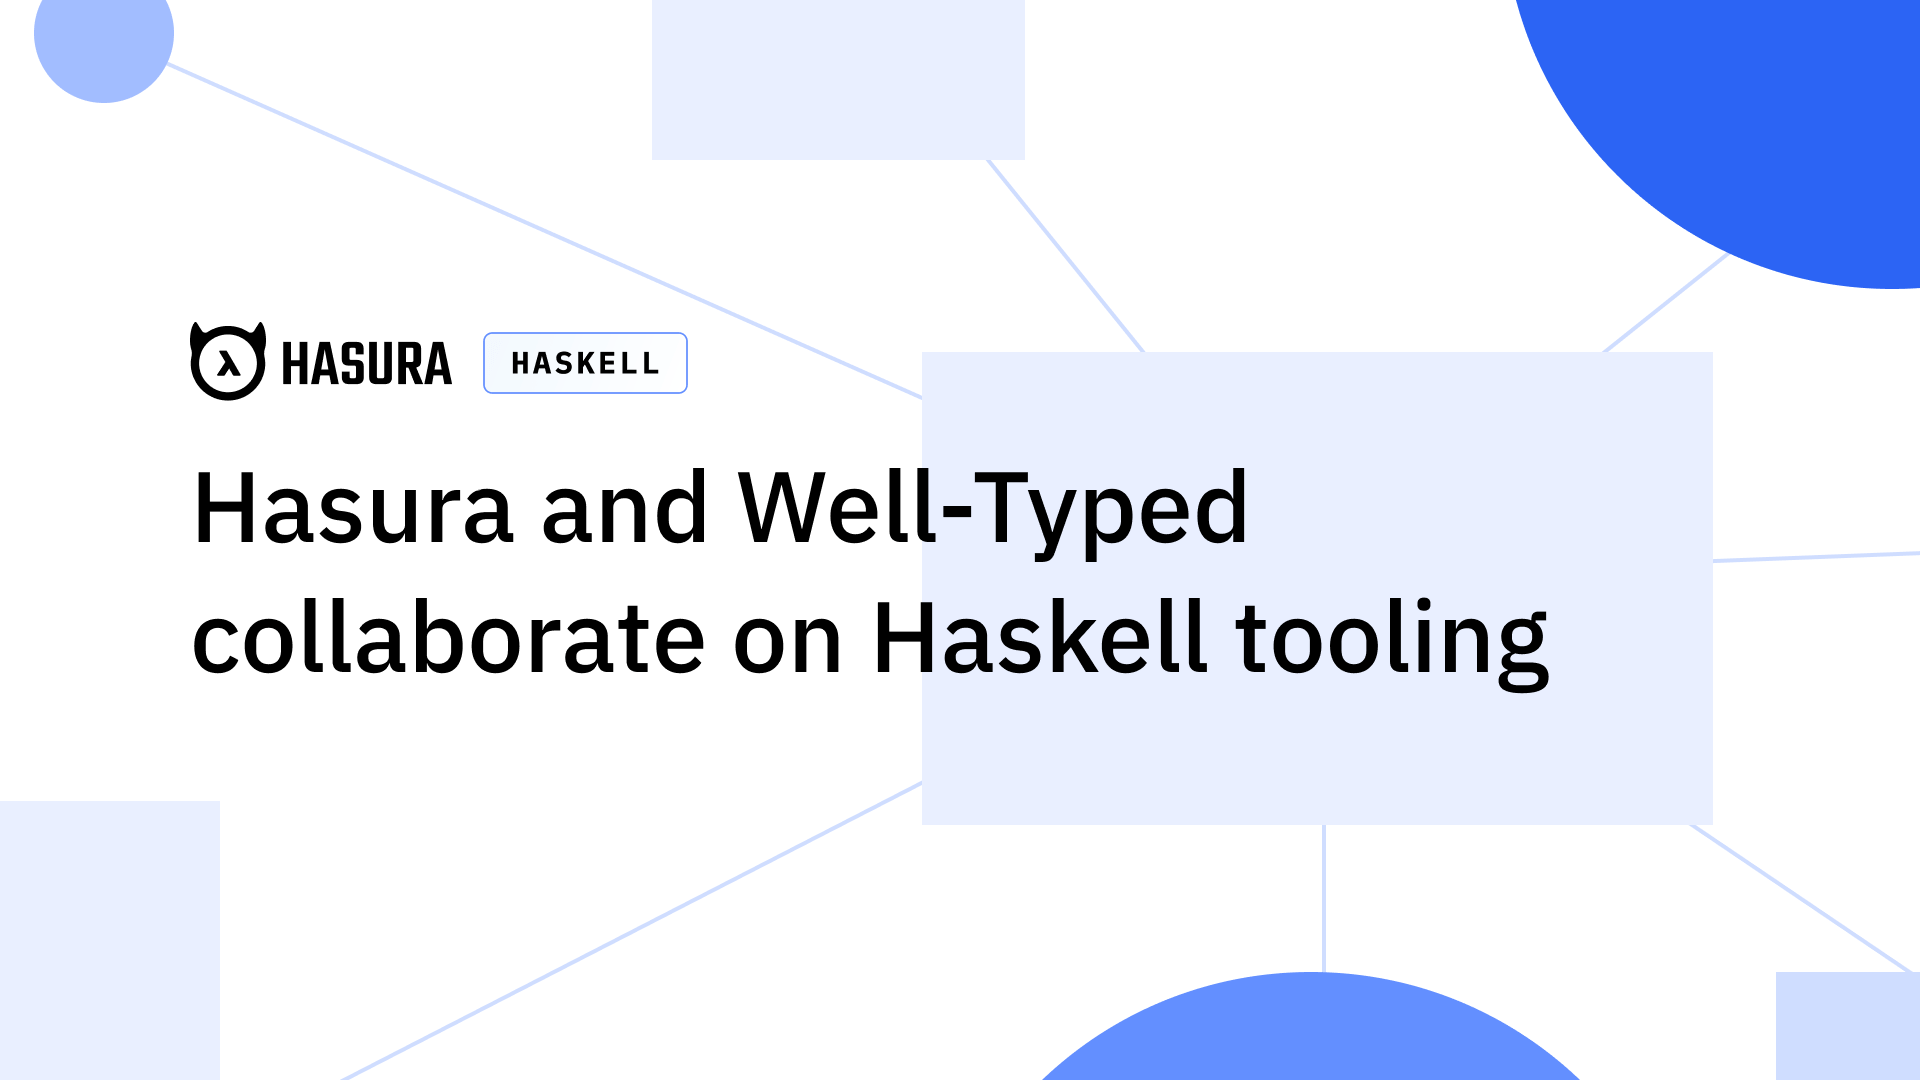 Hasura and Well-Typed collaborate on Haskell tooling